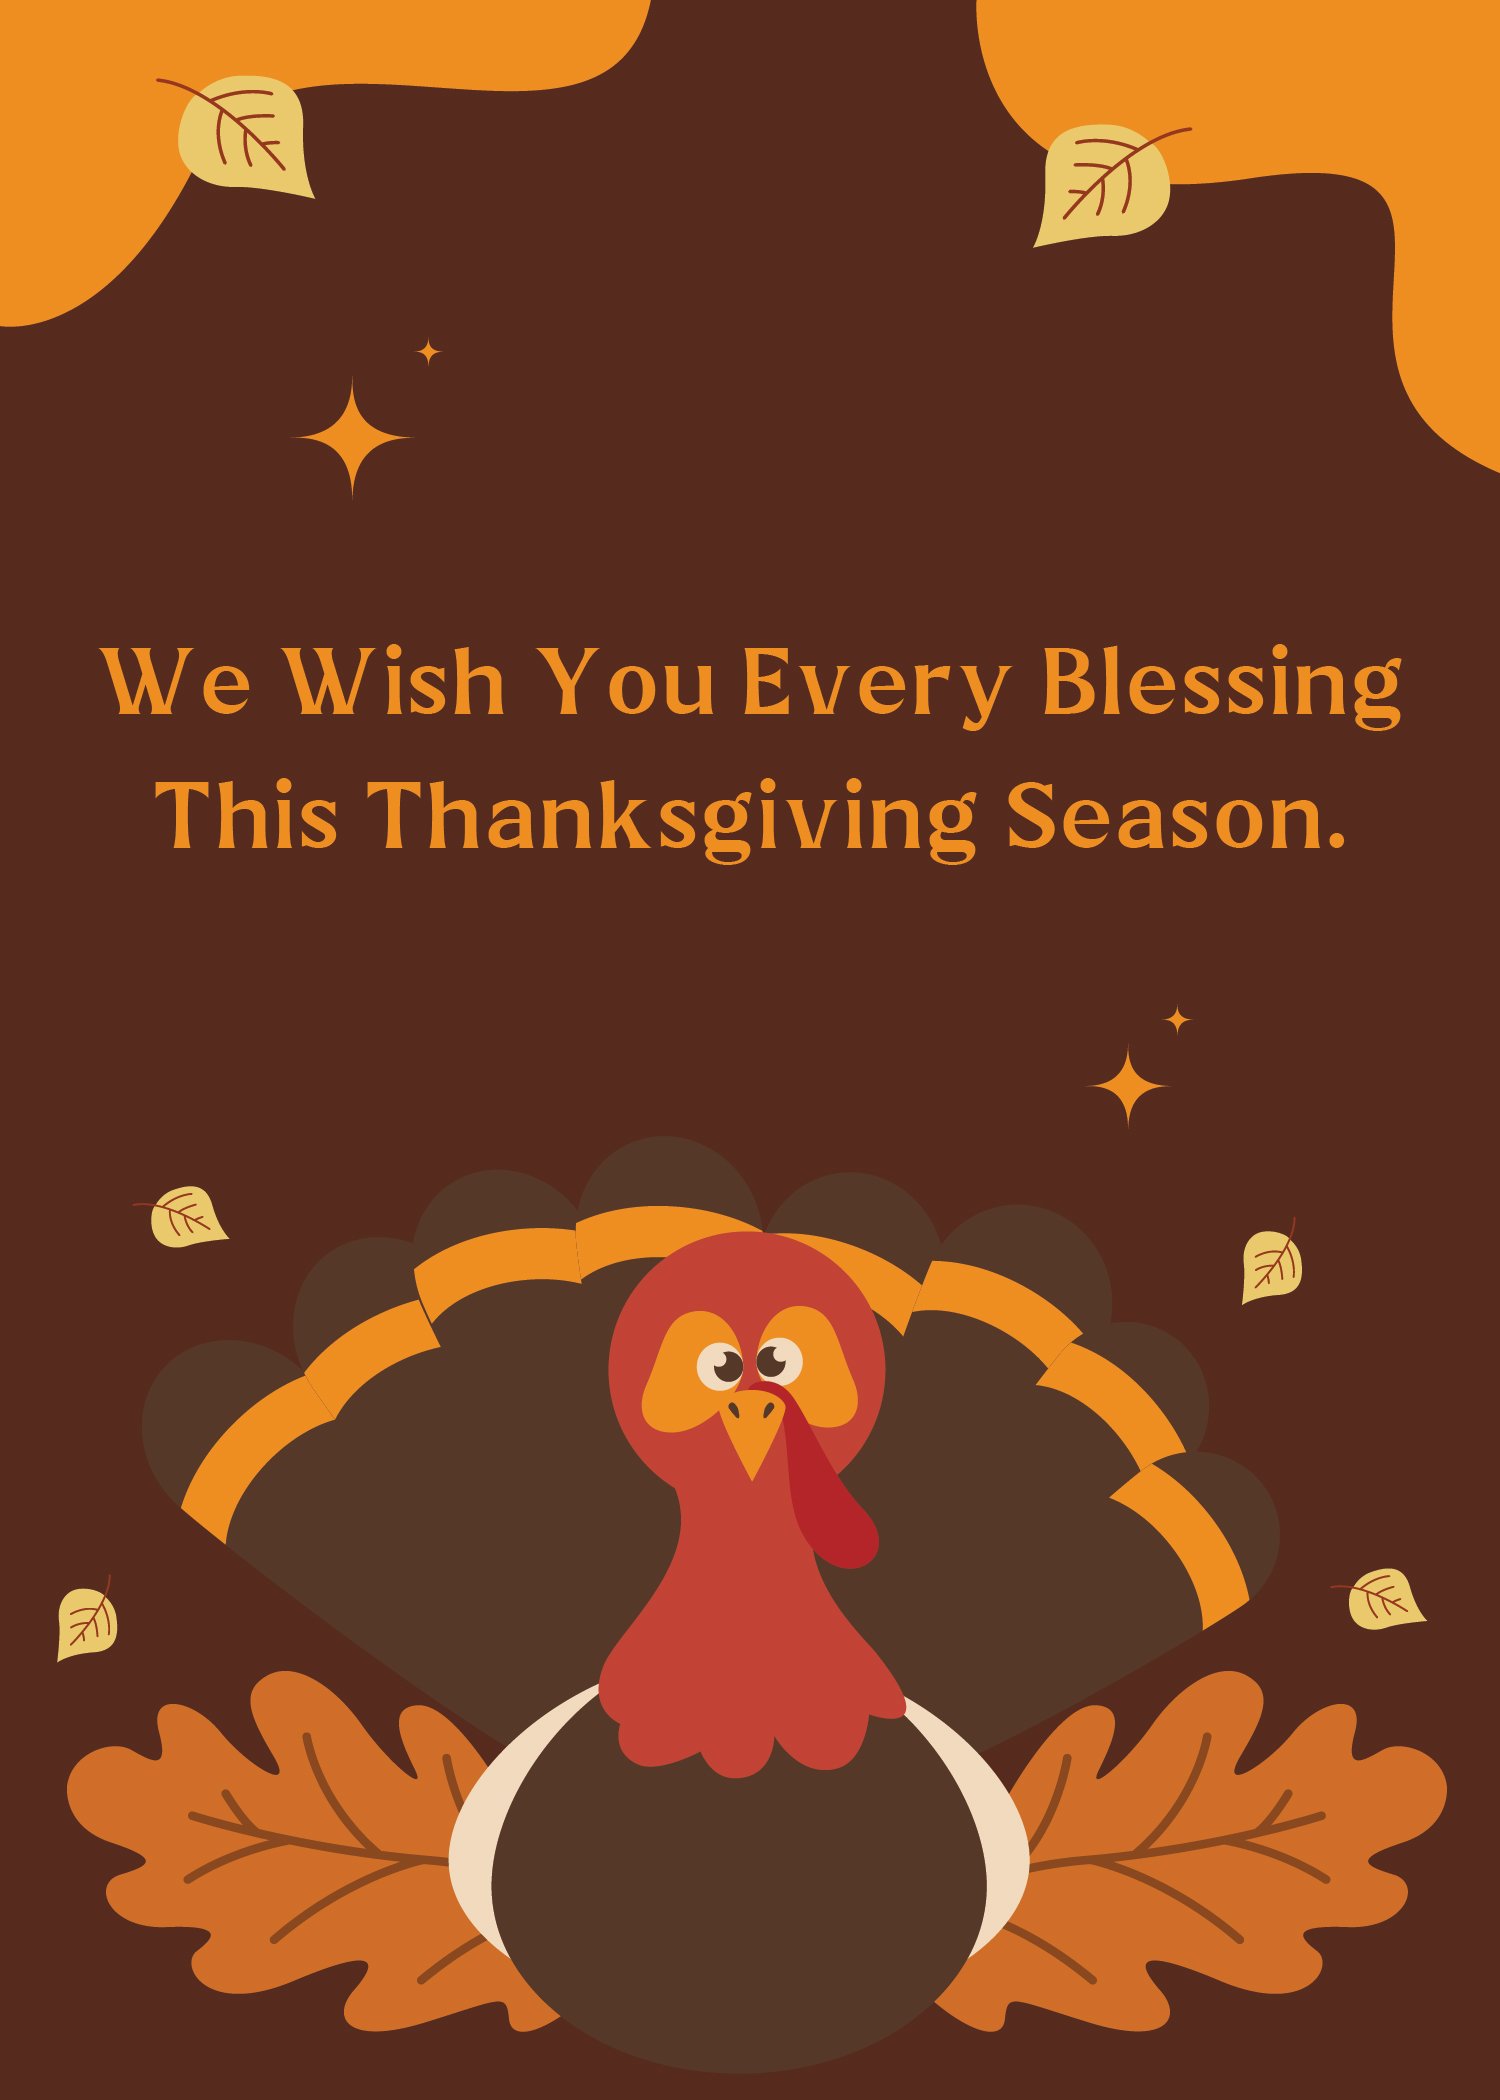 Free Thanksgiving Day Wishes in Word, Google Docs, Illustrator, PSD, Apple Pages, Publisher, EPS, SVG, JPG, PNG